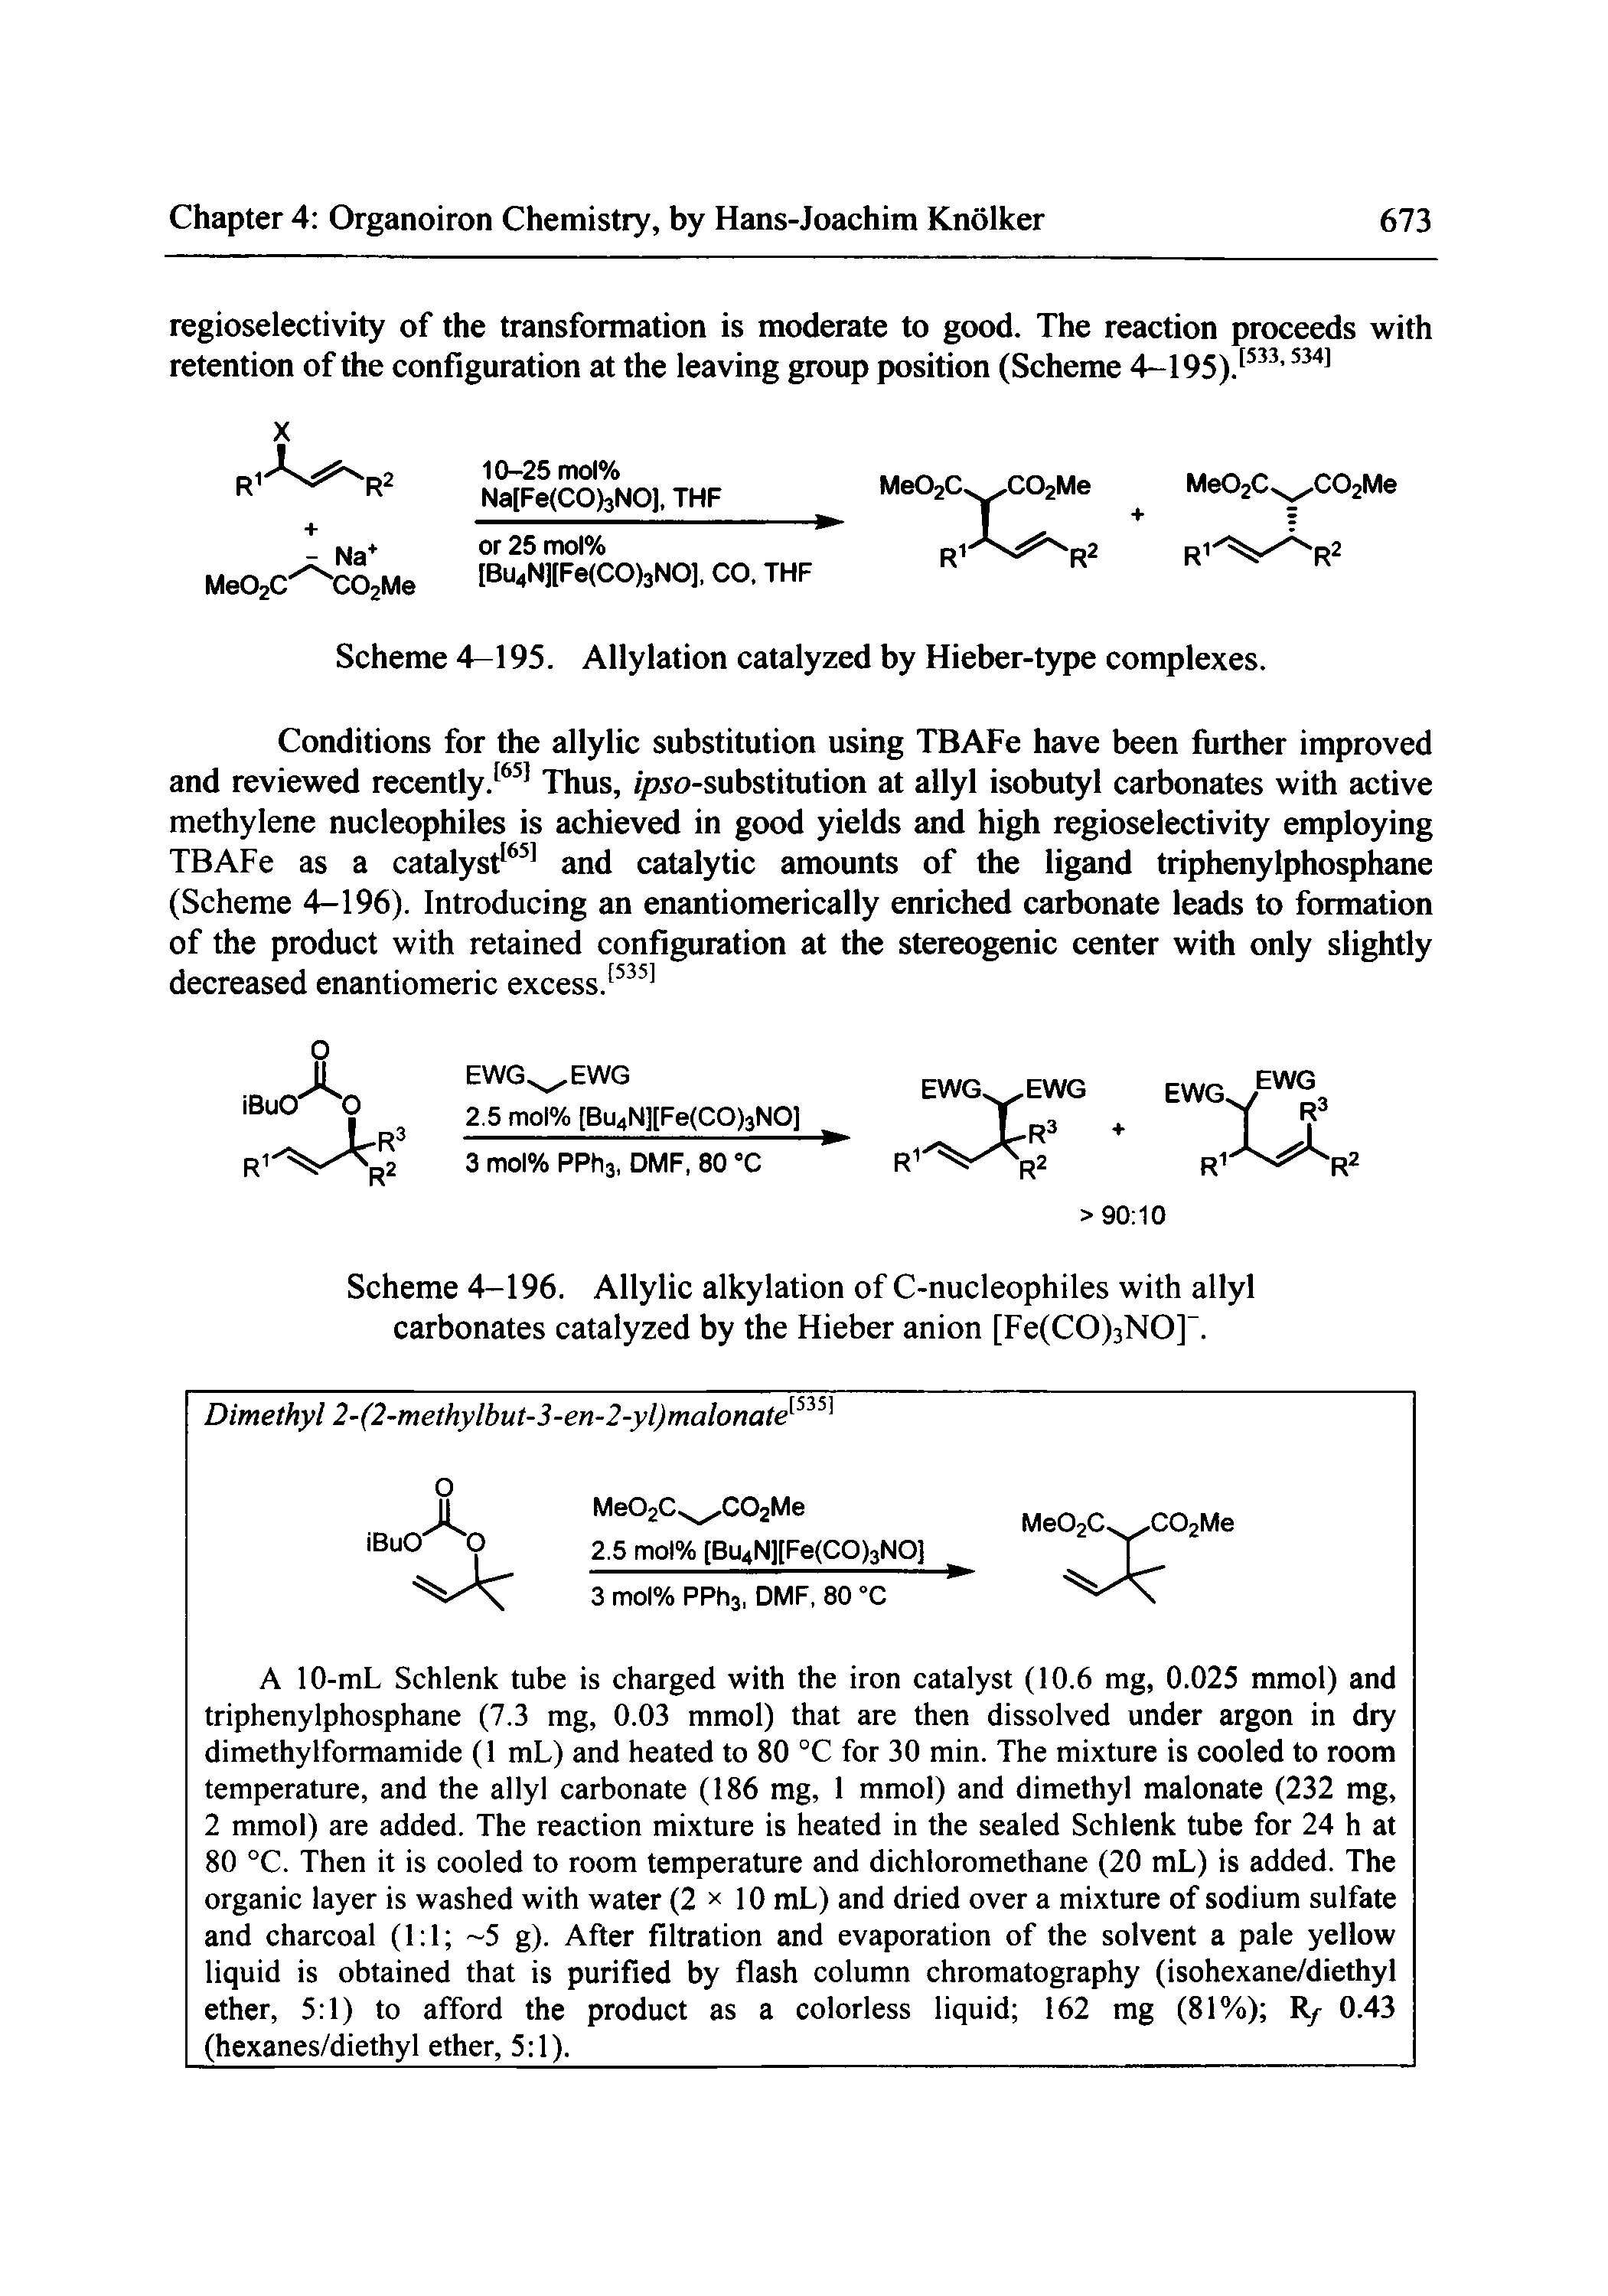 Scheme 4-196. Allylic alkylation of C-nucleophiles with allyl carbonates catalyzed by the Hieber anion [Fe(CO)3NO] .